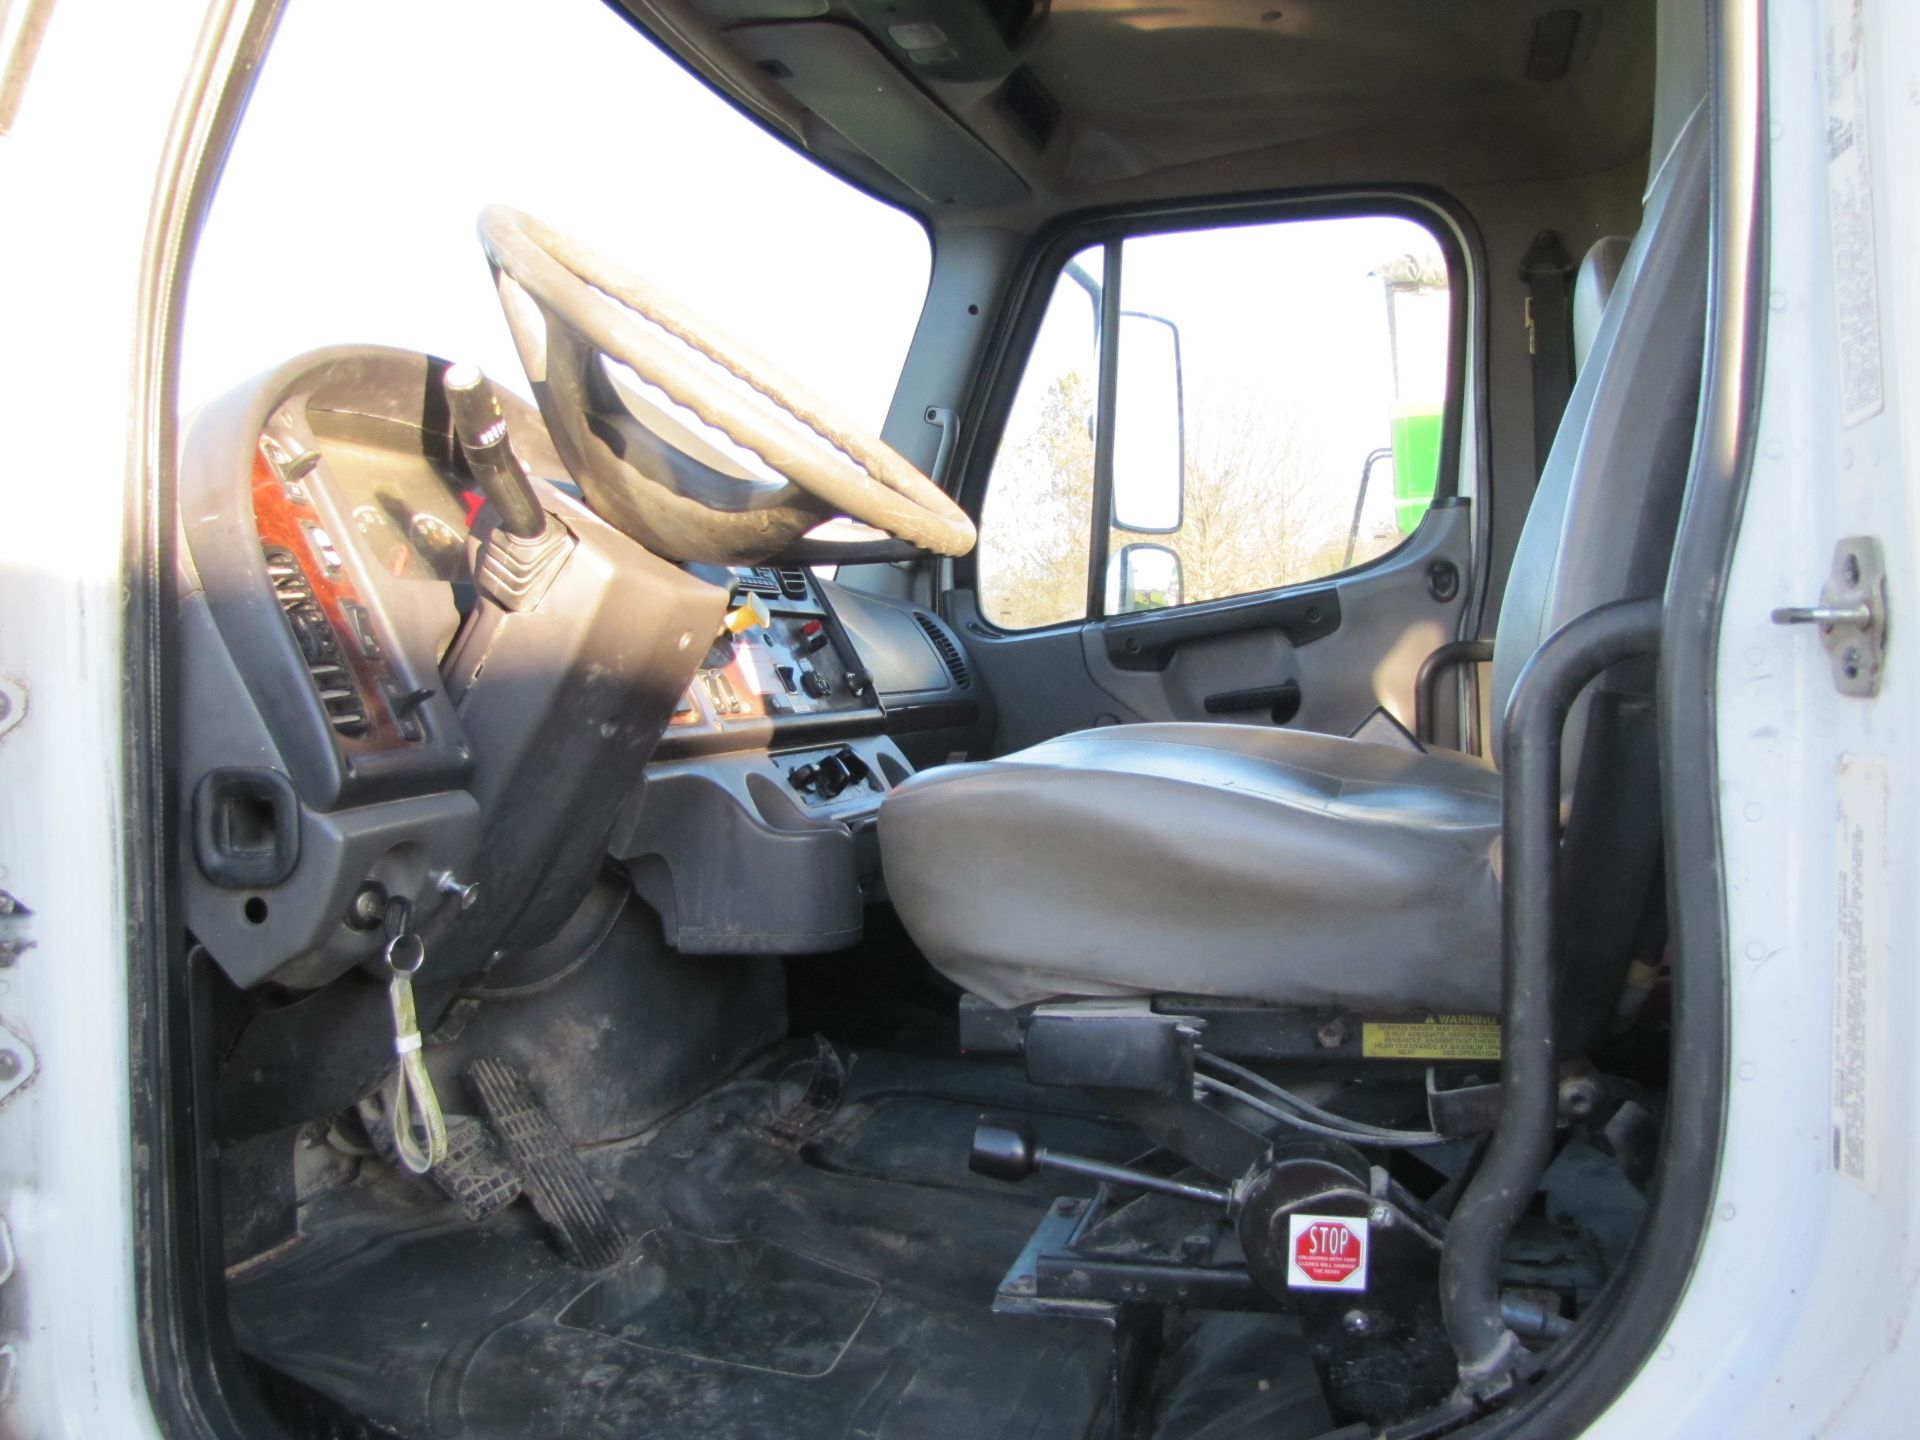 2004 Freightliner single axle grain truck, new motor, 252,600 miles, Allison automatic transmission - Image 33 of 45